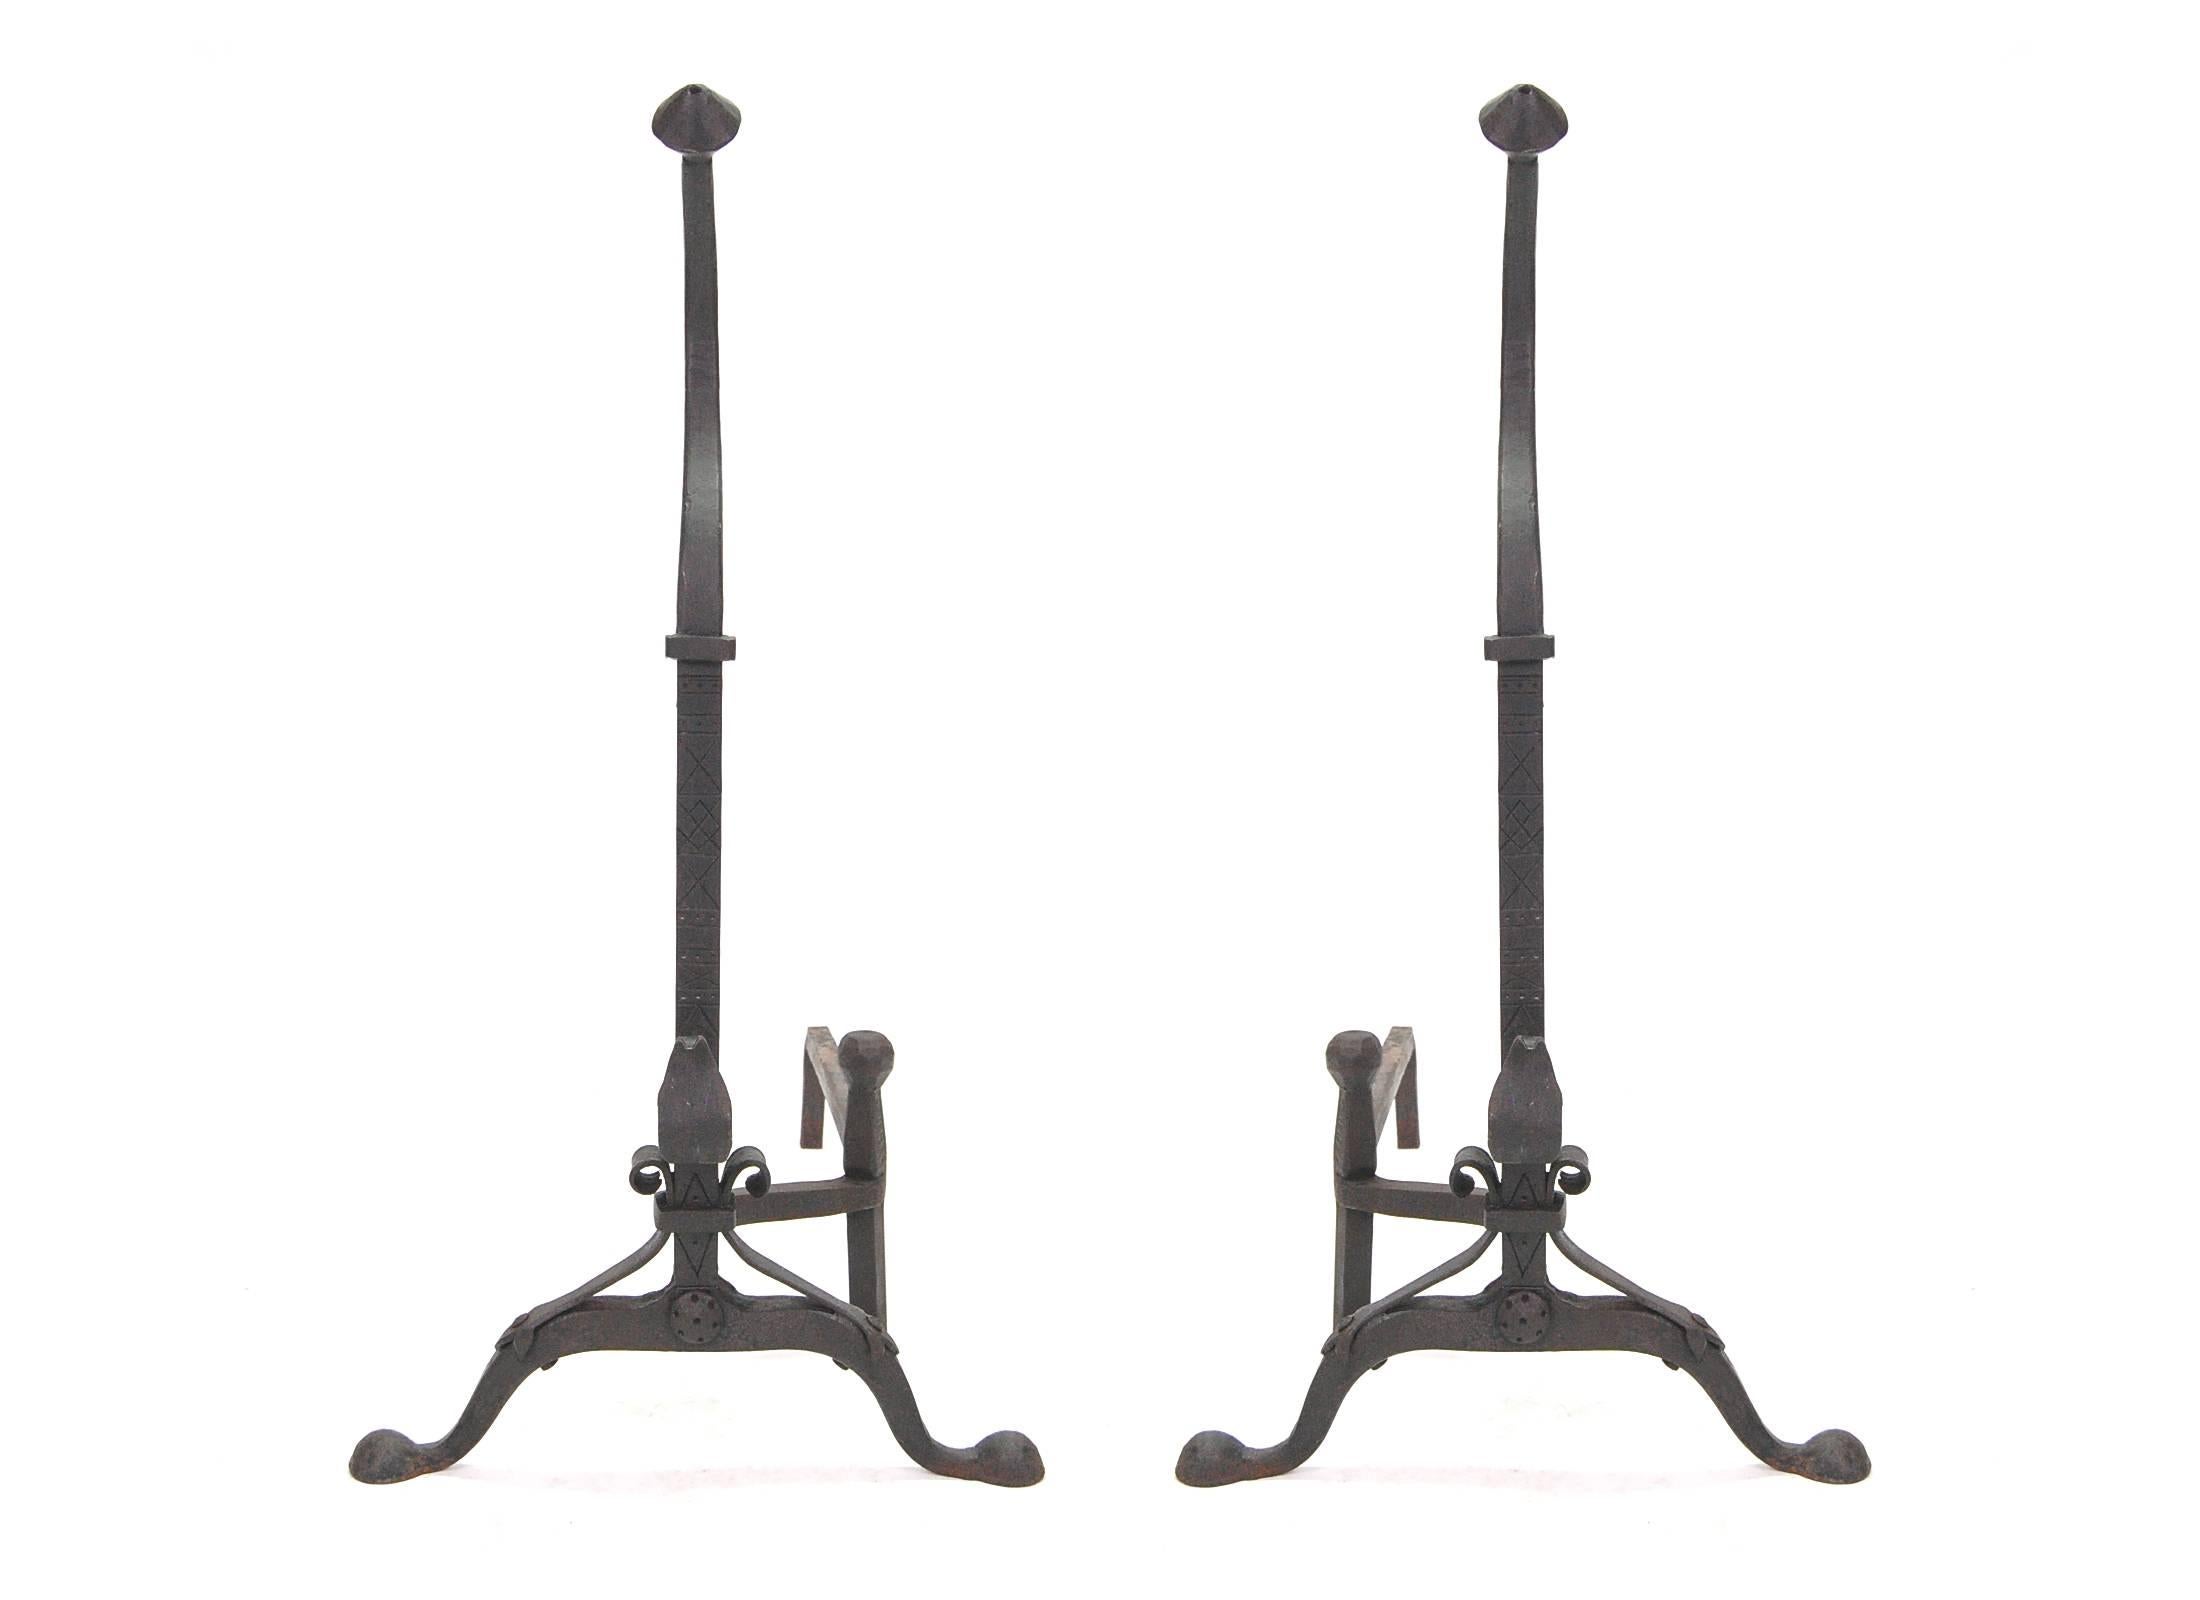 Beautiful pair of hand-forged Andirons, circa 1928, American. Obviously crafted by a highly skilled blacksmith, these andirons have great scale and proportions and the quality is top notch, with crosshatching up the front of the main body and hand